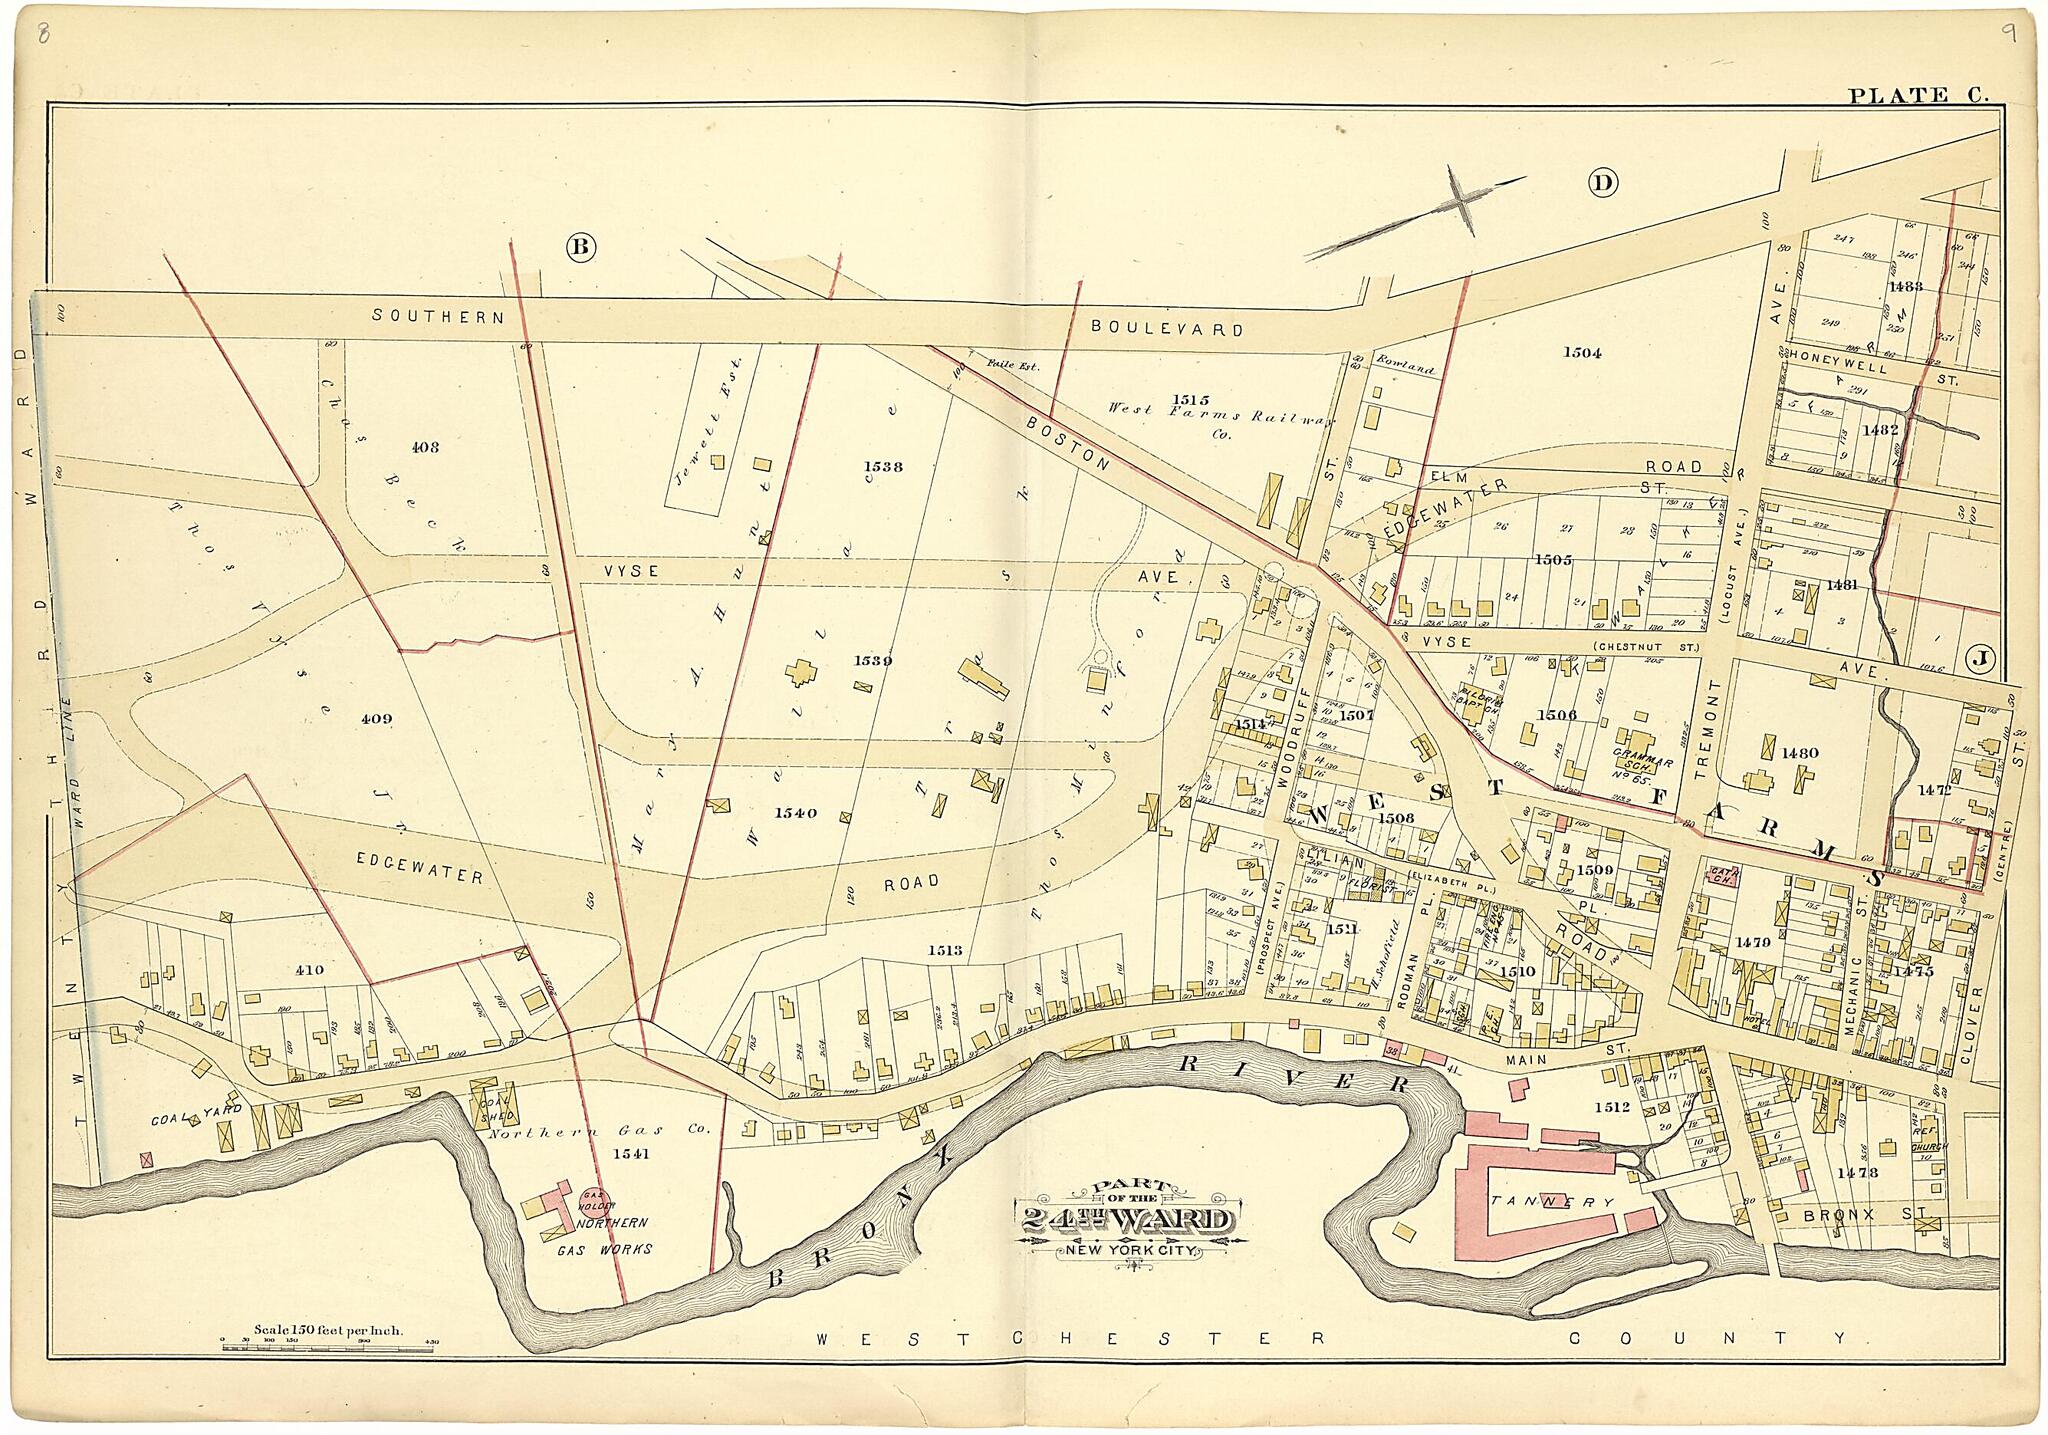 This old map of Part of the 24th Ward New York City - Plate C from Atlas of the Twenty Fourth Ward, New York City from 1882 was created by A. H. (August H.) Mueller in 1882